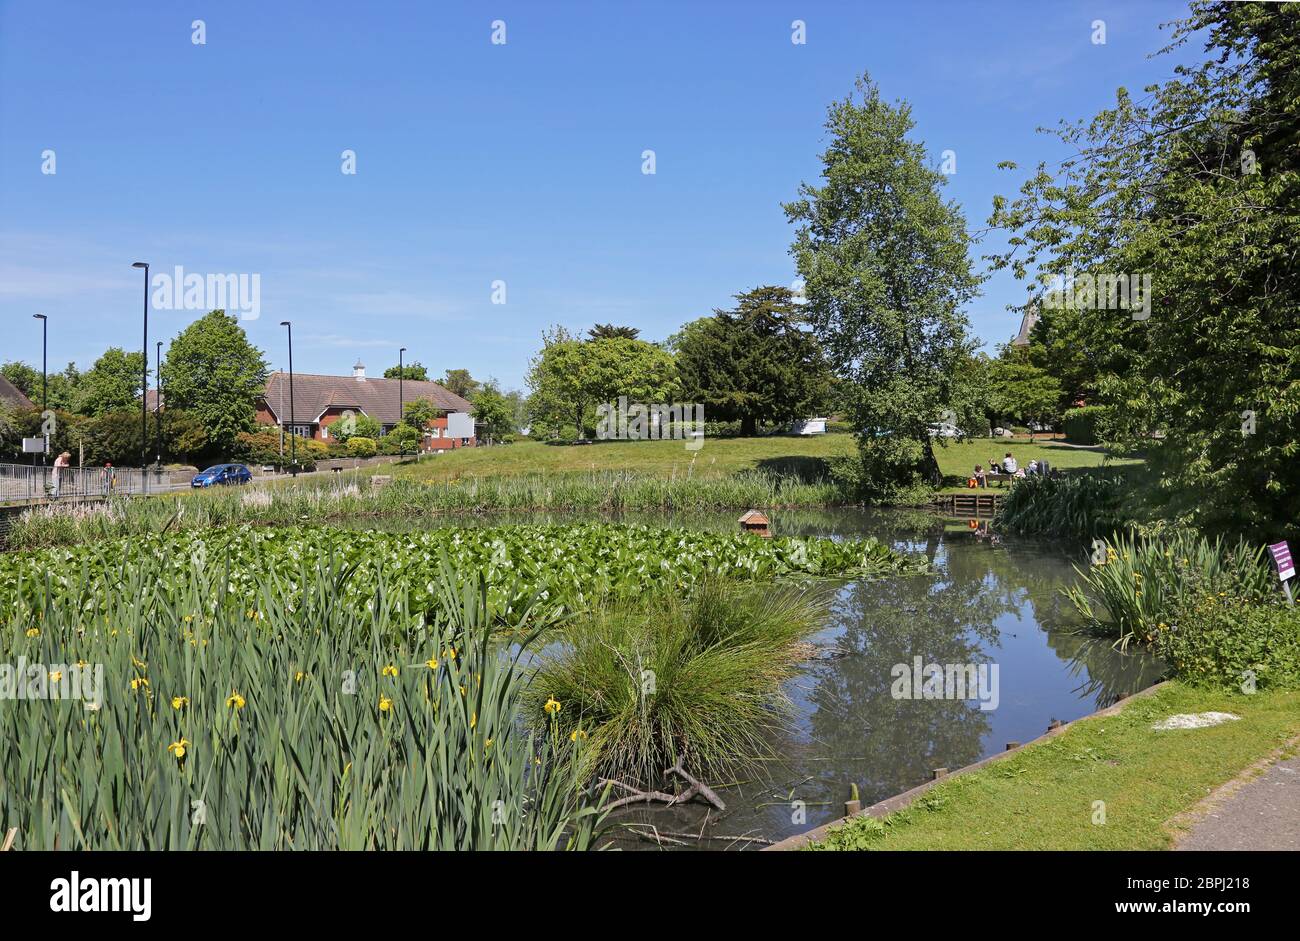 The duck pond and old village green in Sanderstead, Surrey, an affluent village in South Croydon, UK. Corner of Limpsfield Road and Addington Road Stock Photo